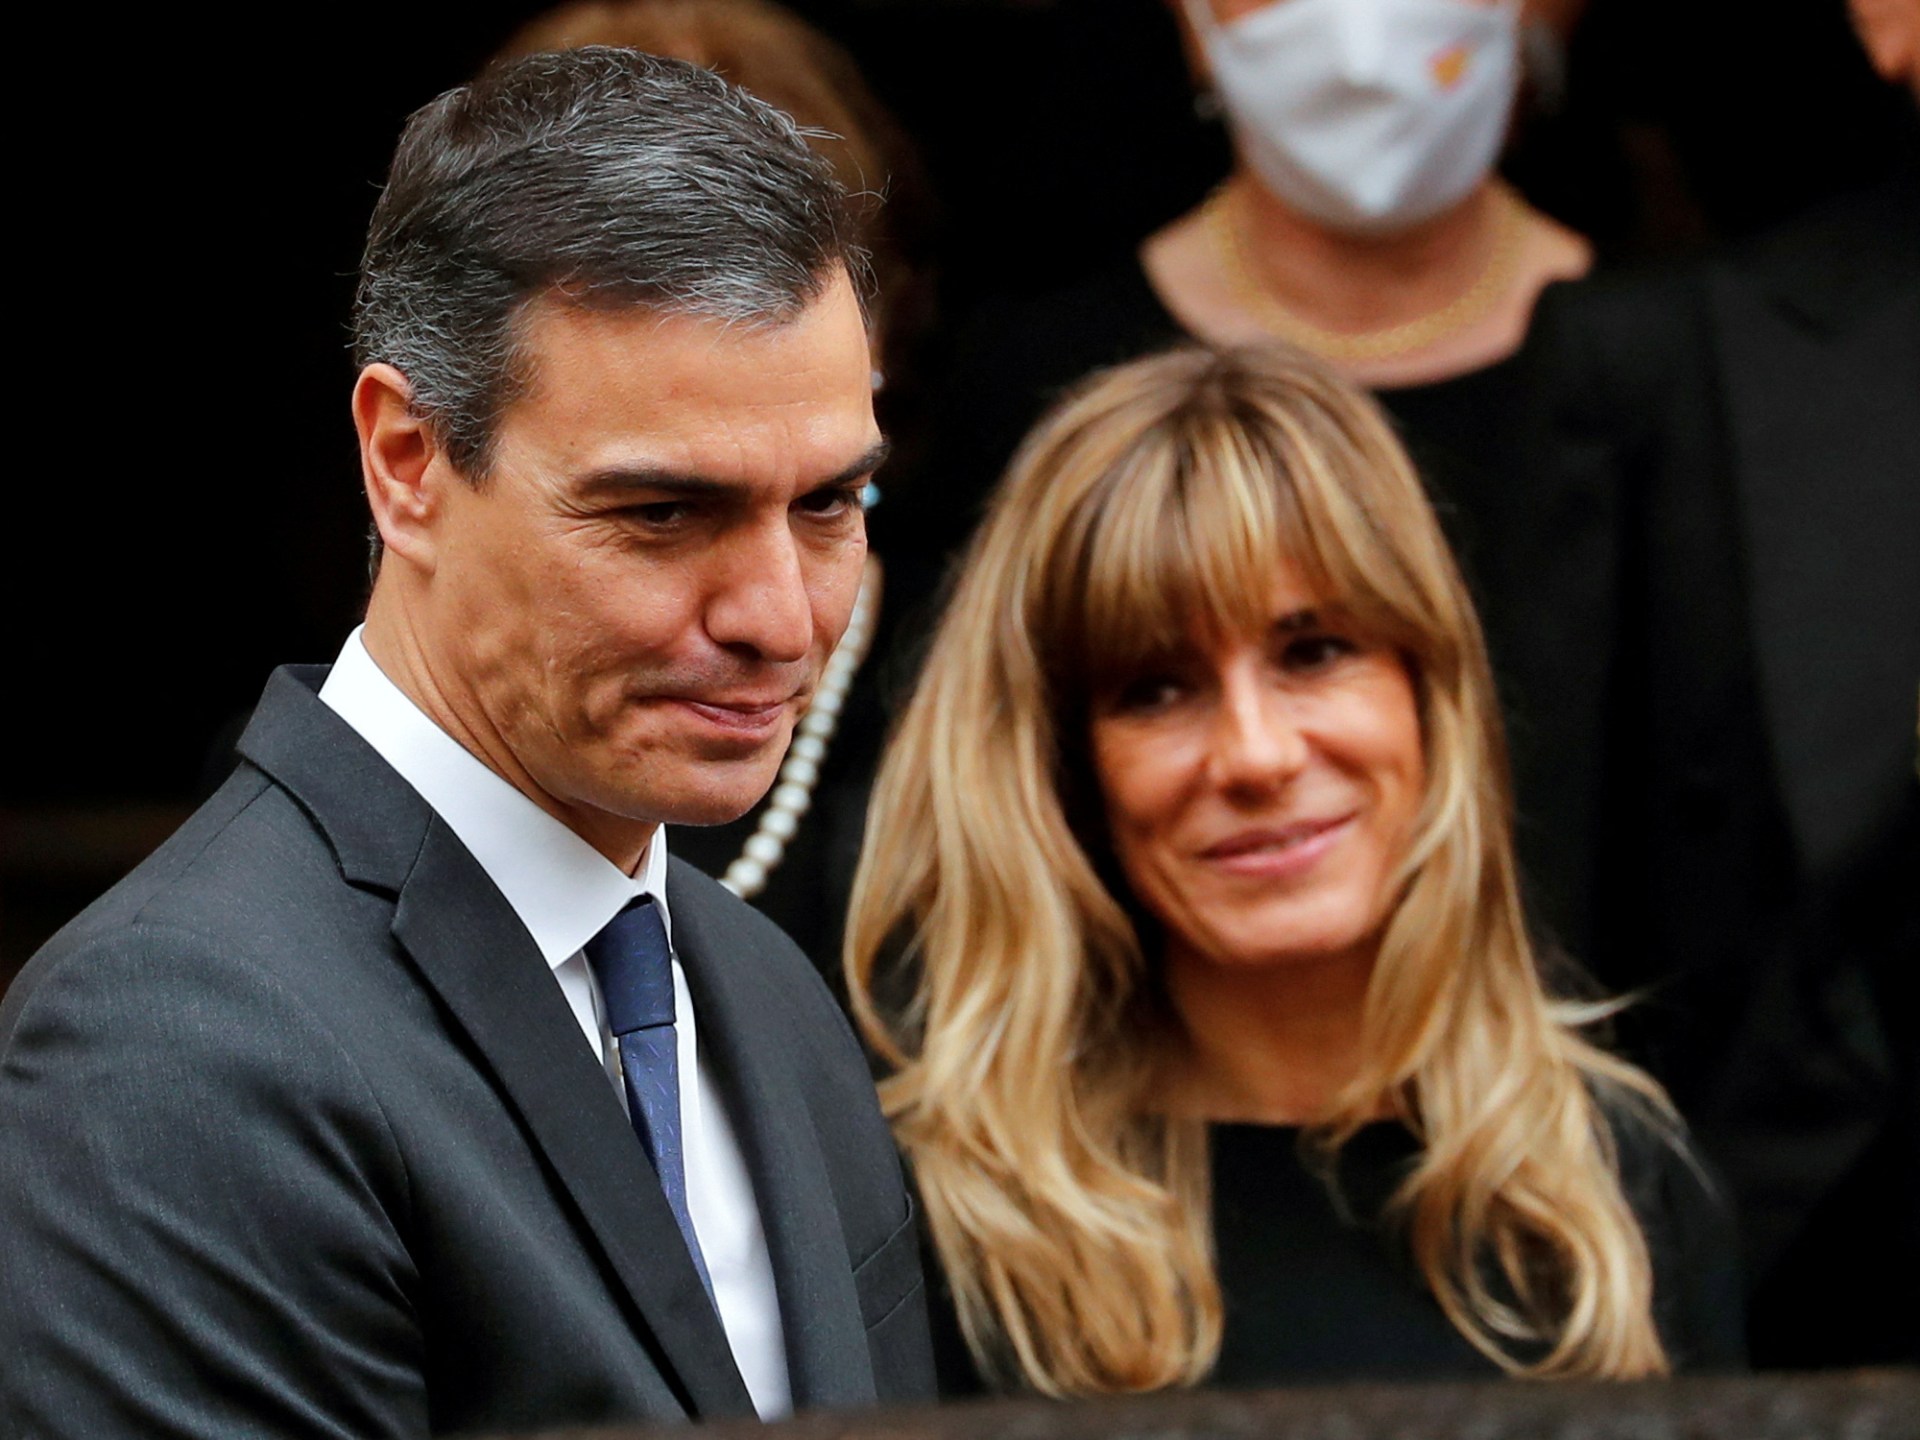 Spanish Prime Minister Sanchez Reflects on Leadership Amid Probe Against Wife